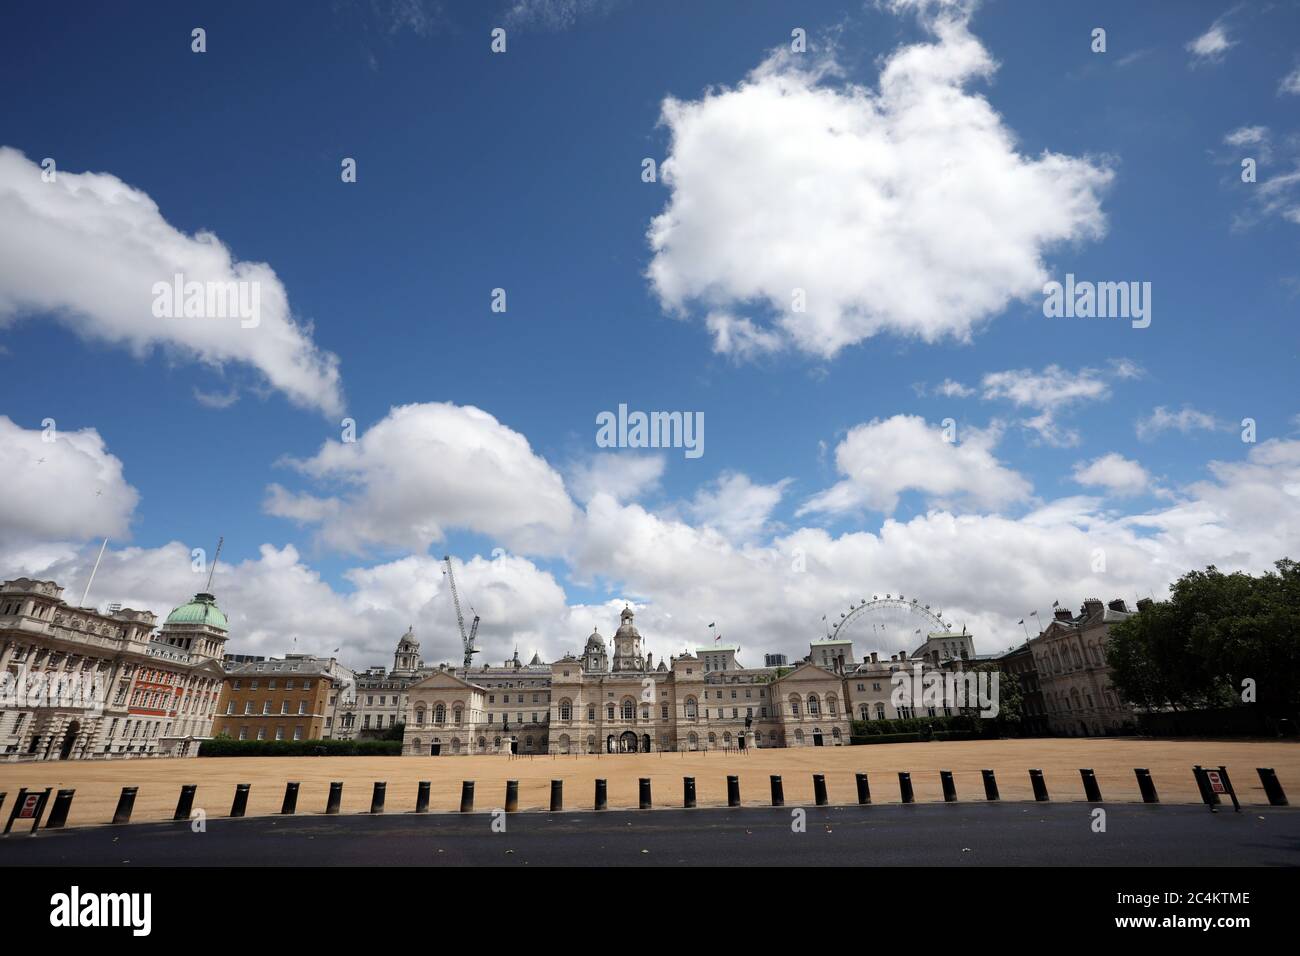 London, UK. 27th June, 2020. Despite it being Armed Forces Day, Horse Guards Parade is completely deserted at lunchtime, as the COVID-19 Coronavirus pandemic has prevented many official events from taking place and also kept many tourists and sightseers away also. Credit: Paul Marriott/Alamy Live News Stock Photo